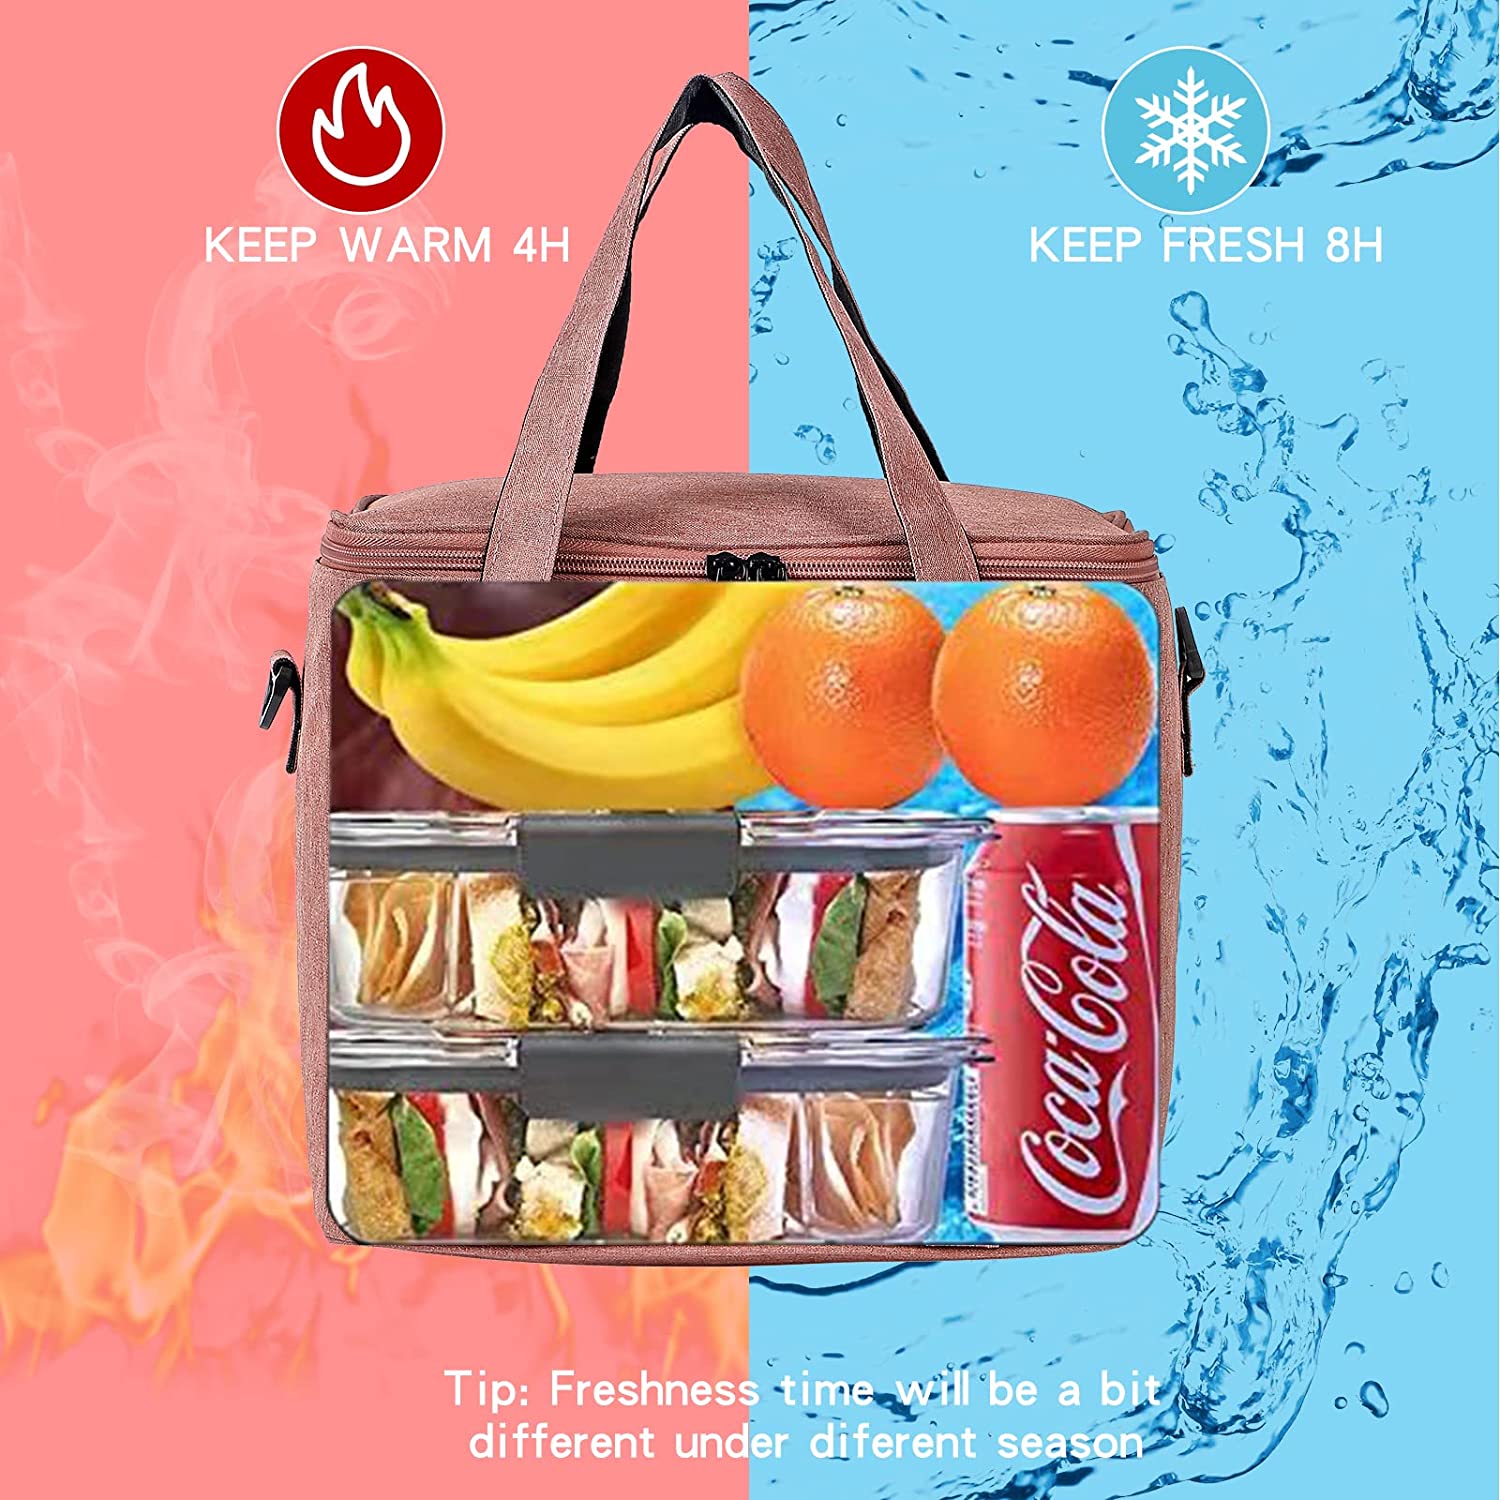  Mularoka Lunch Bag, Reusable Lunch Box lunch bag for Women  Leakproof lunchbox Insulated Cooler Bag Big Capacity Lunch Bags for Women  Travel Work Picnic beach essentials (Seashell Serenade Printing): Home 